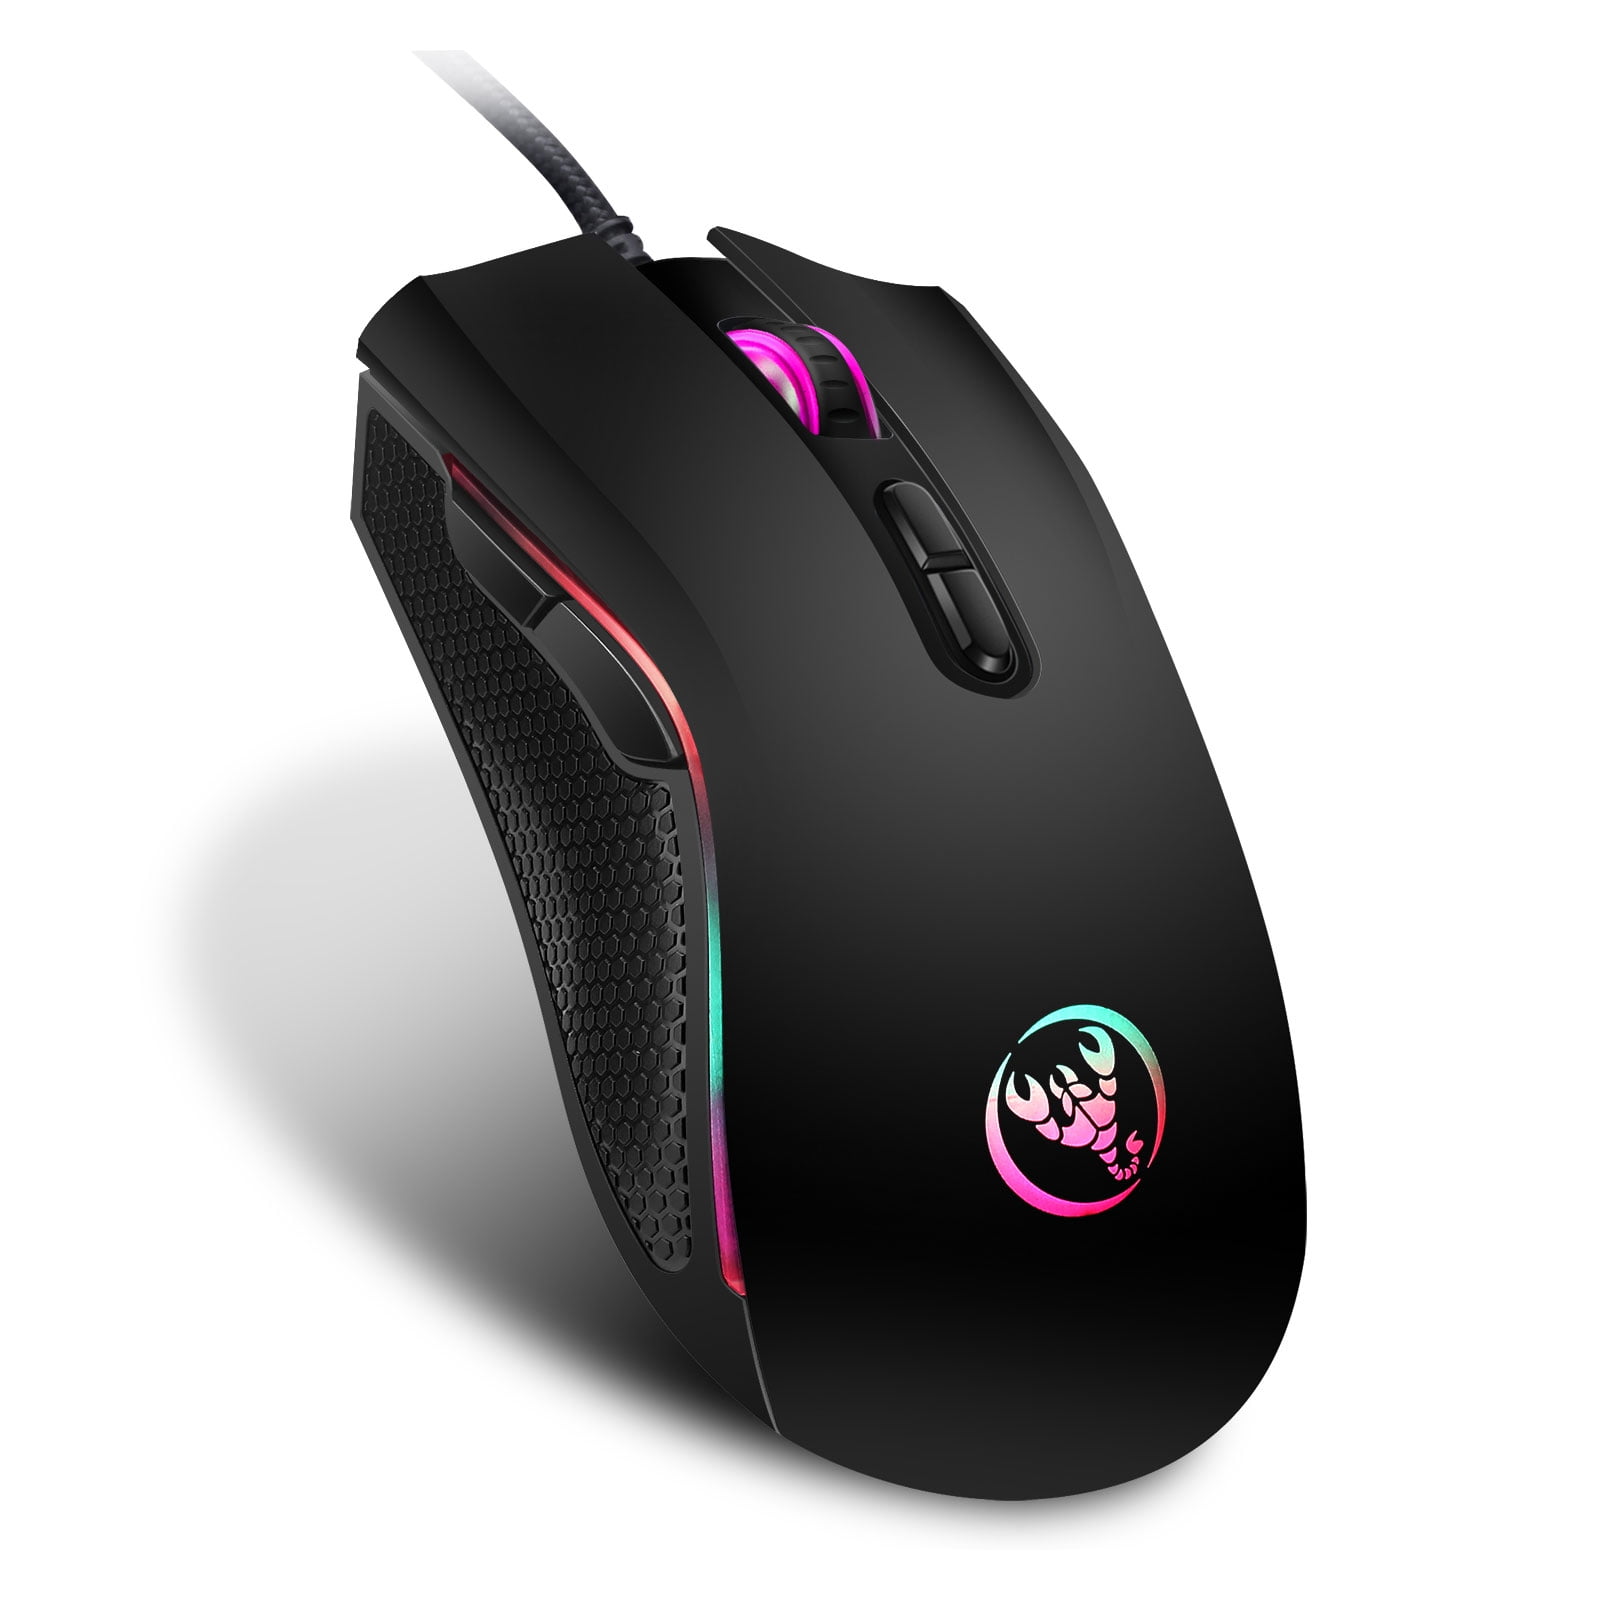 Love lamp Mice Wired Gaming Mouse Ergonomic Mouse 7 Programmable Button Optical LED Color Backlight Gaming Mice